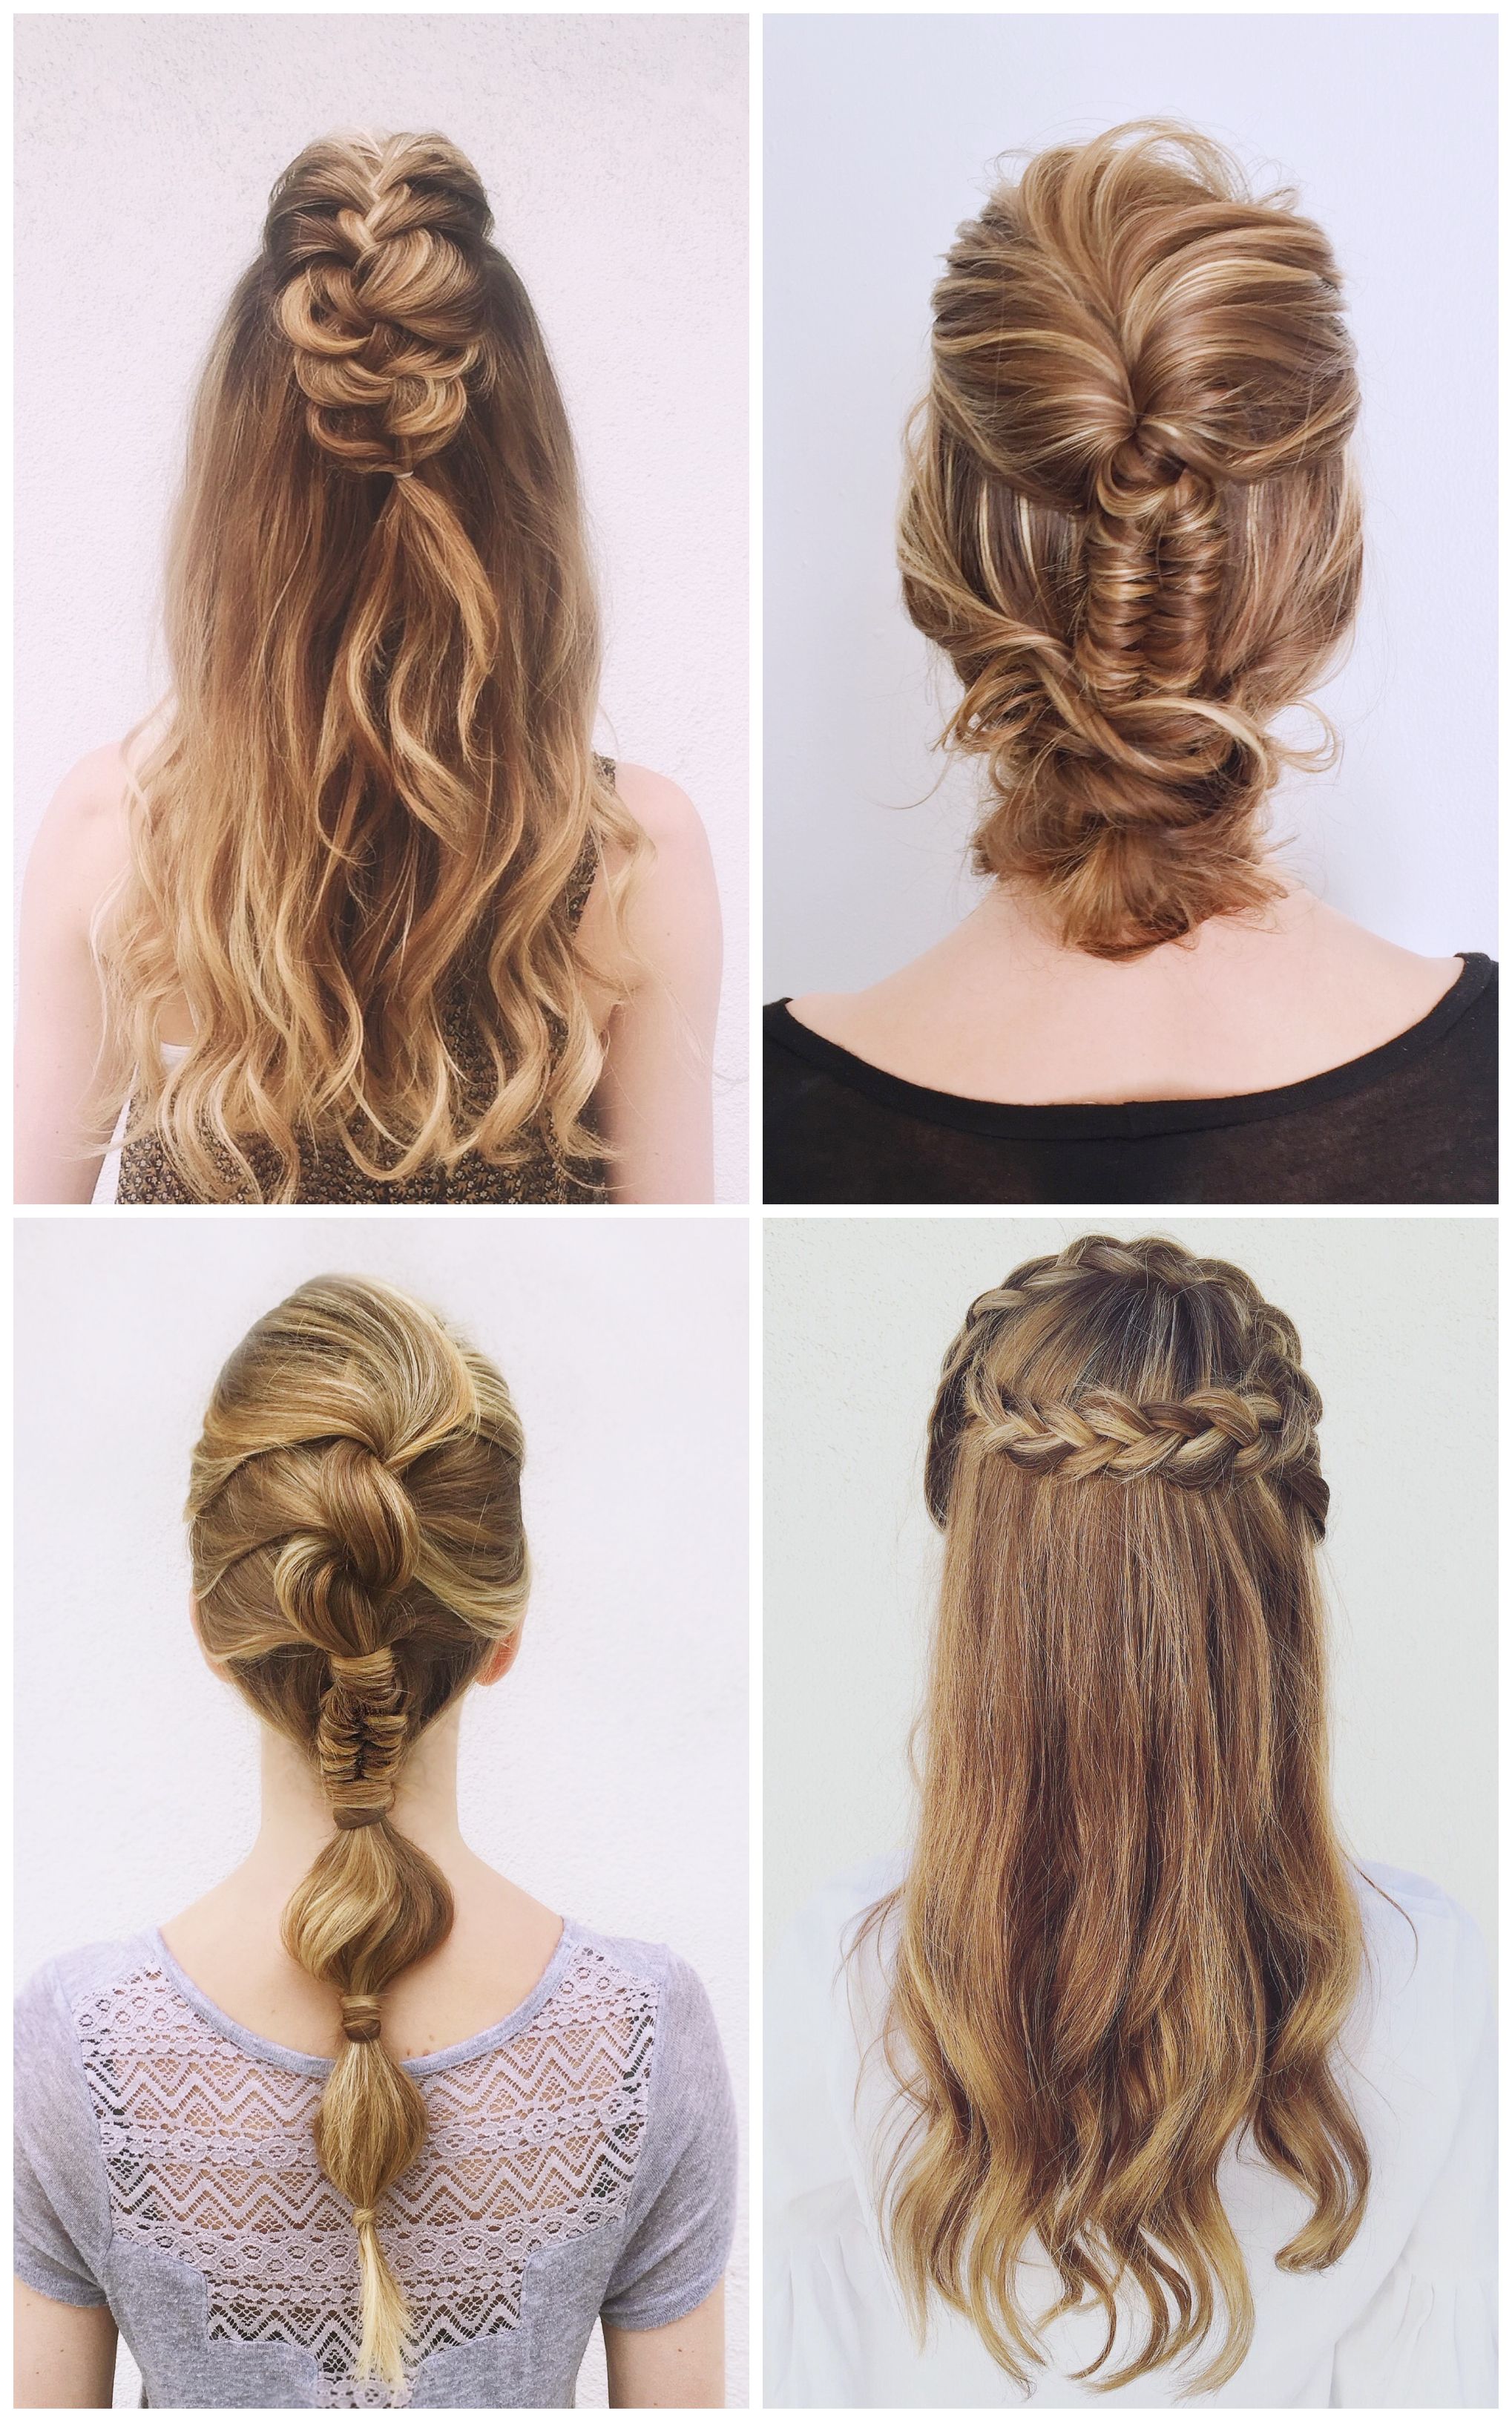 20 Braided Prom Hairstyles For Stylish Girls In Newest Braided And Twisted Off Center Prom Updos (View 8 of 20)